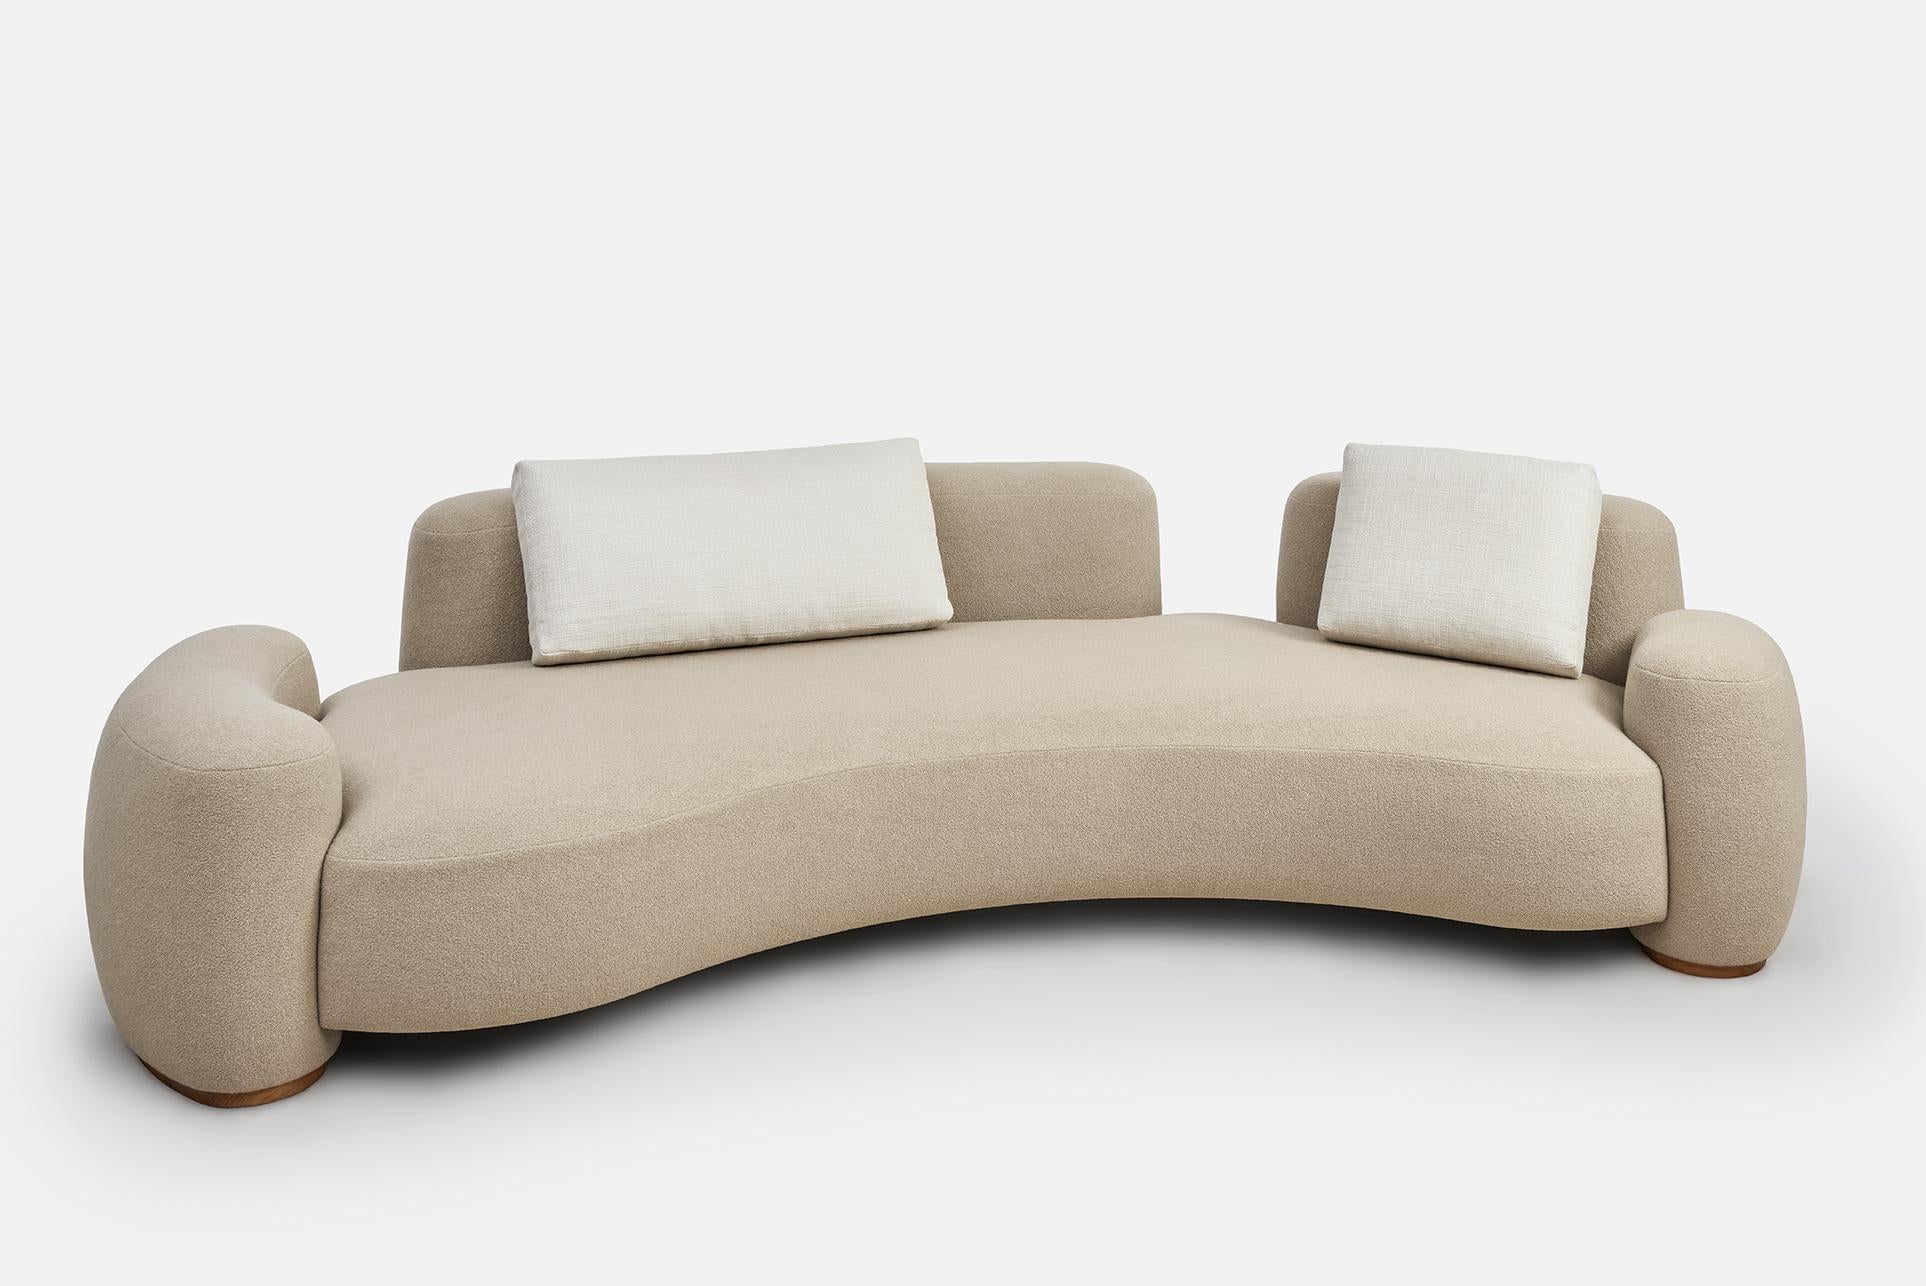 Beige baba sofa by Gisbert Pöppler.
Dimensions: H 74 (SH43) x W 303 x D 140.5 cm.
Materials: Upholstered wooden frame, teak footings.

Like a friend that wants to cuddle, Baba is an upholstered sofa series for lounging in complete comfort. The